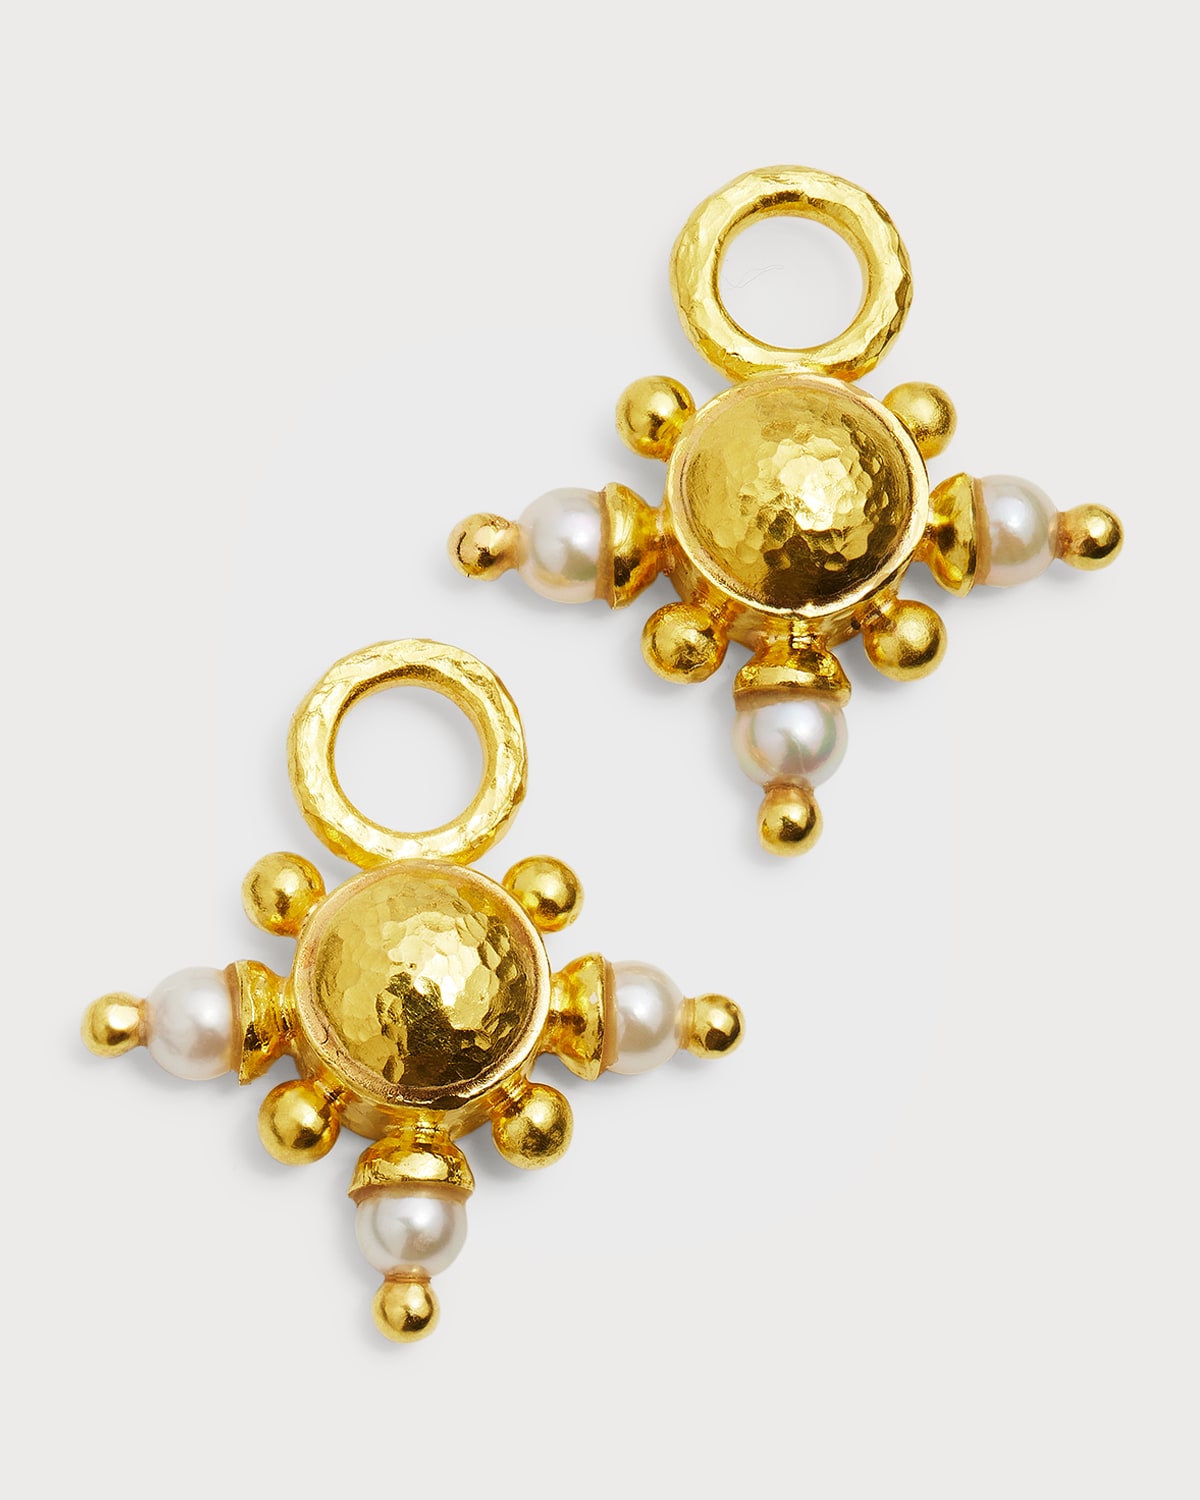 19K Yellow Gold Gold Domed Pearl Earring Pendants for Hoops